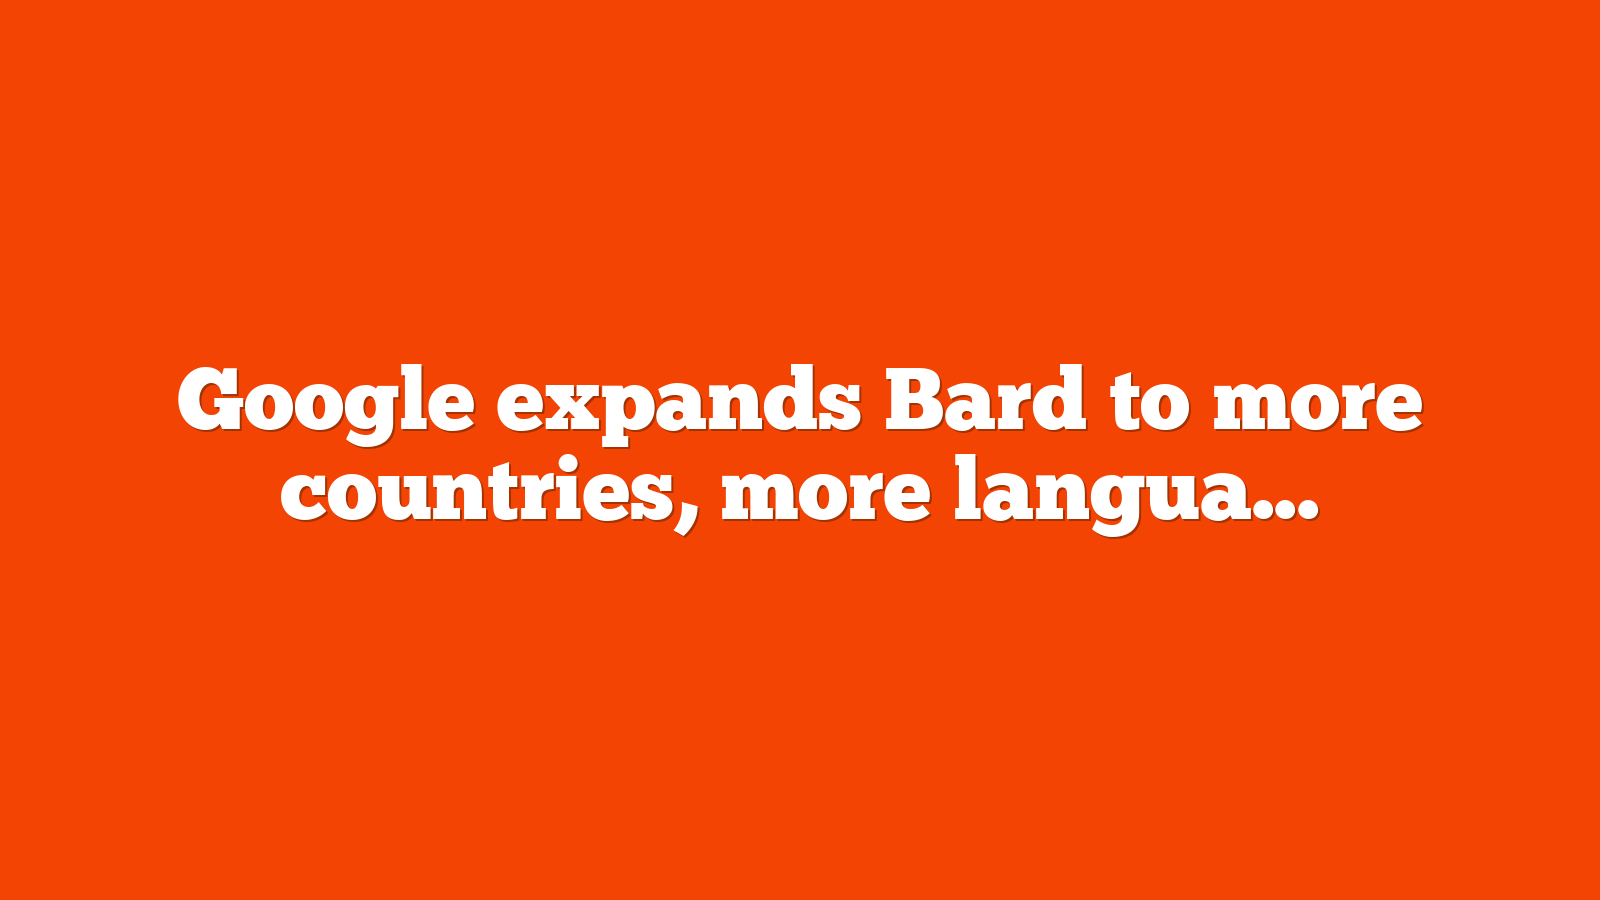 Google expands Bard to more countries more languages and adds new features